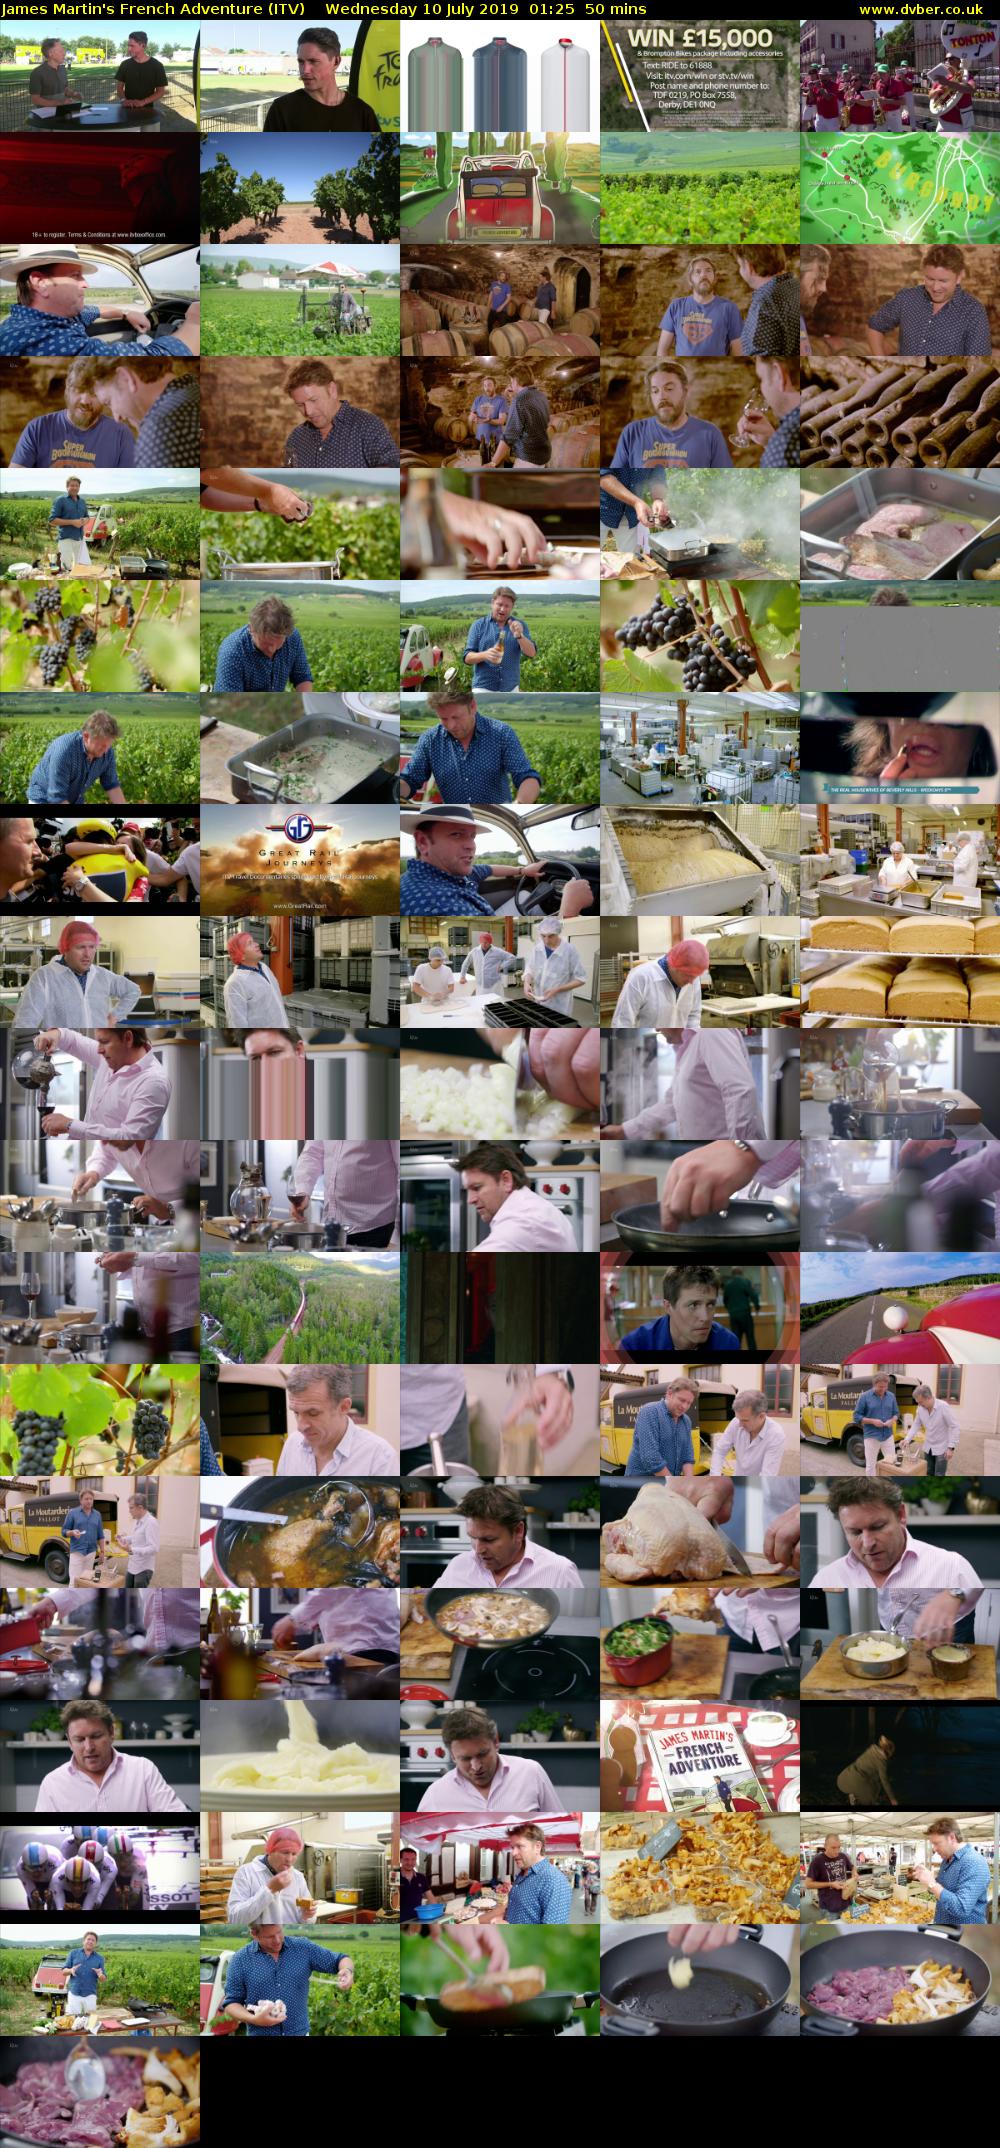 James Martin's French Adventure (ITV) Wednesday 10 July 2019 01:25 - 02:15